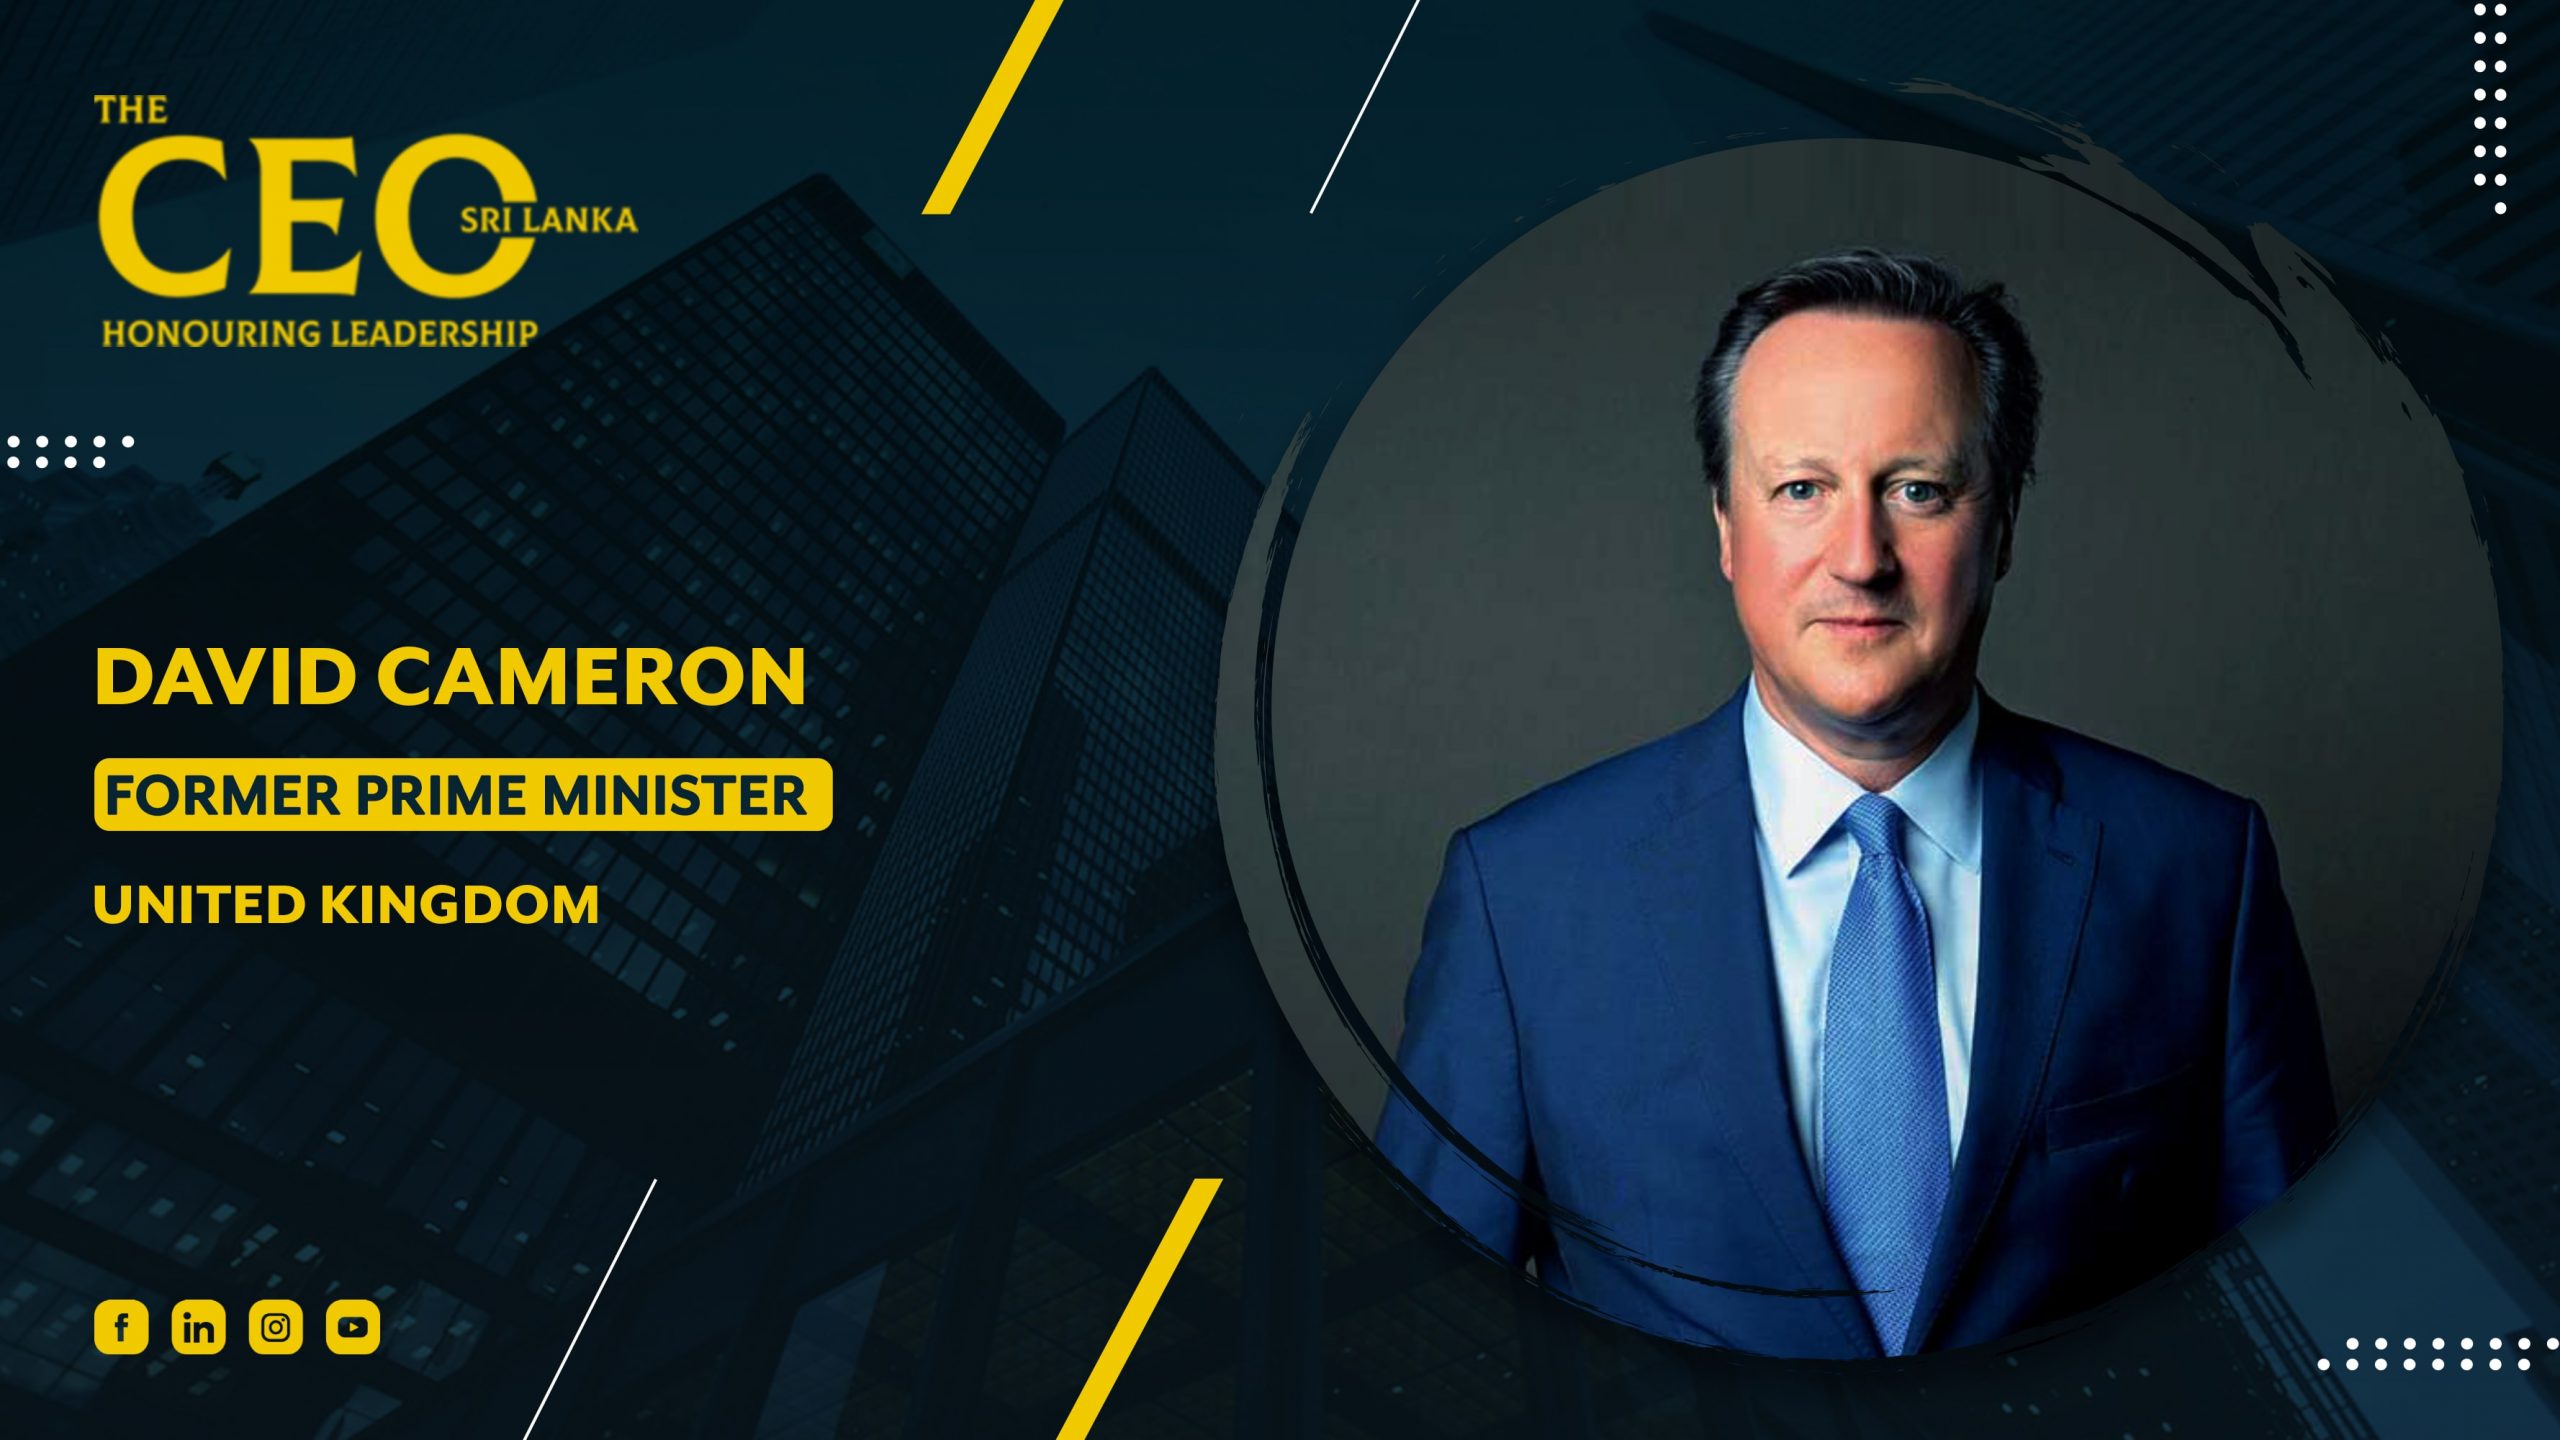 David Cameron To Address Port City Colombo UAE Roadshow Unveiling Opportunities and Incentives for Global Investors